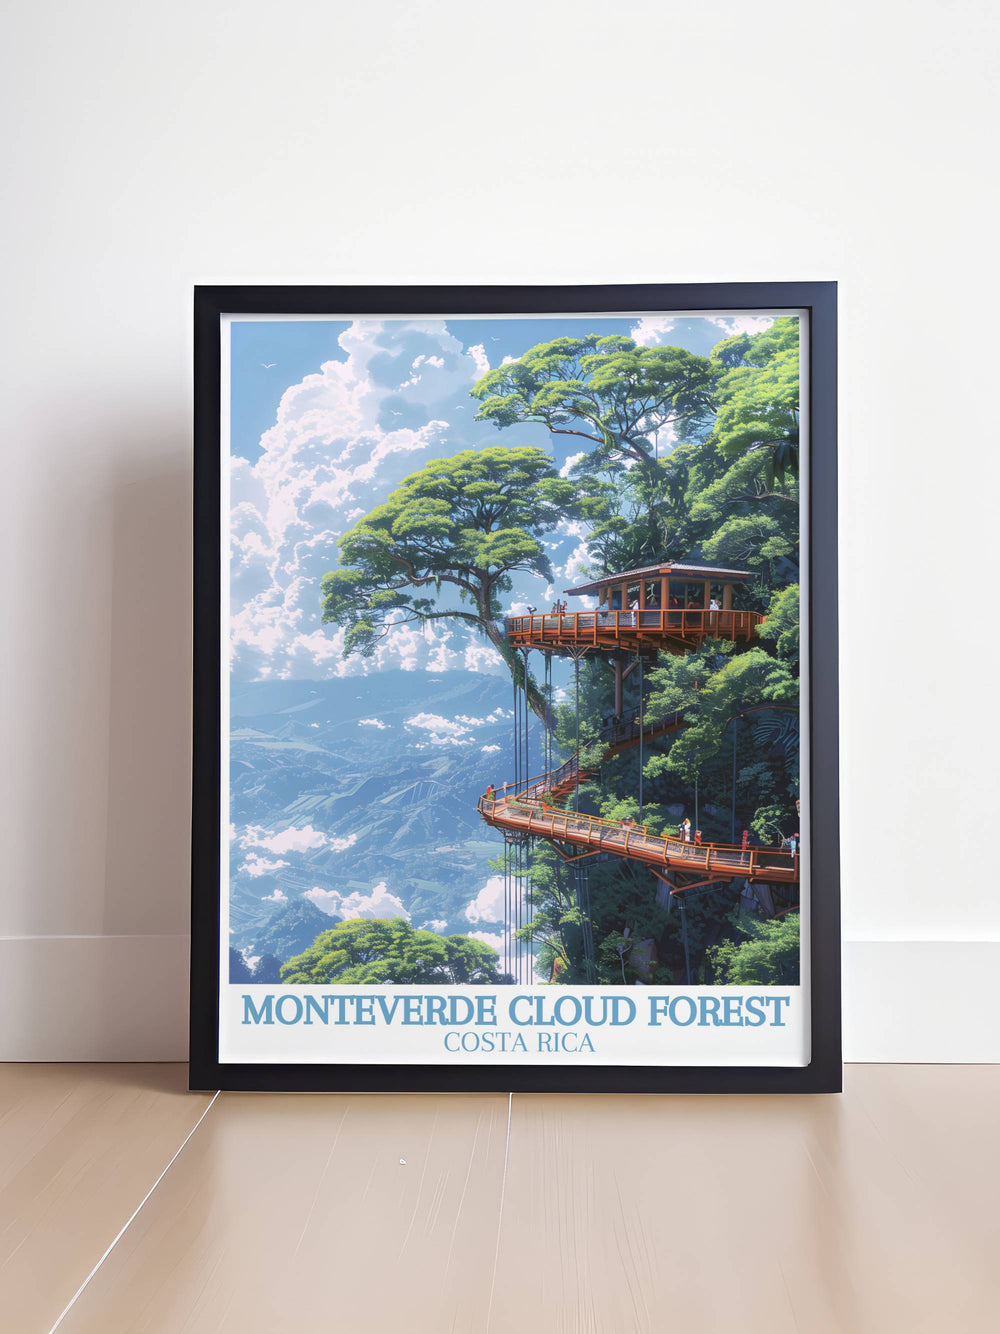 Modern wall decor of the Sky Walk in Monteverde, featuring the rich greens of the forest blending with the clear skies above.